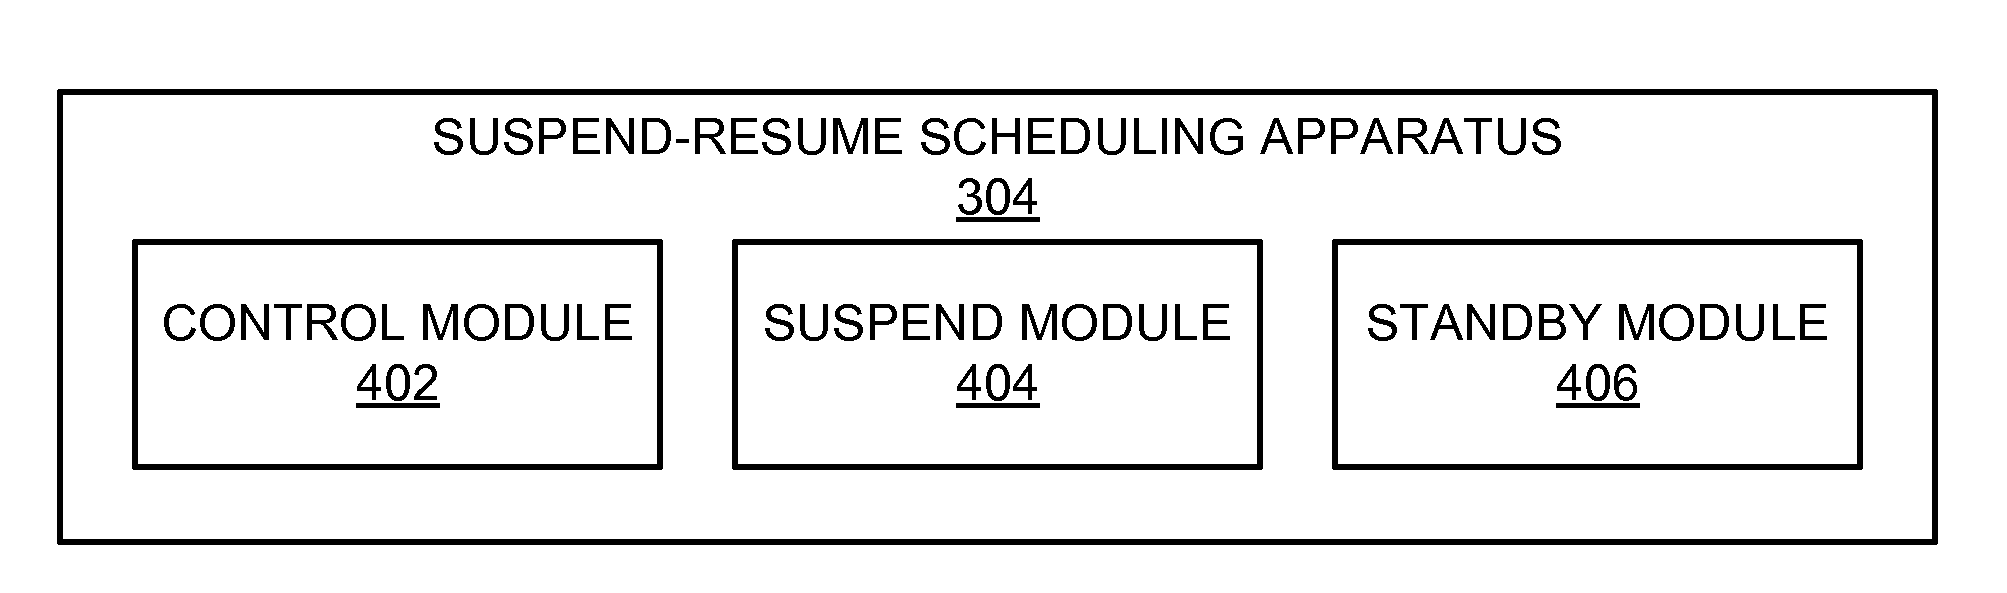 Apparatus, System, and Method for Accurate Automated Scheduling of Computer Suspend and Resume